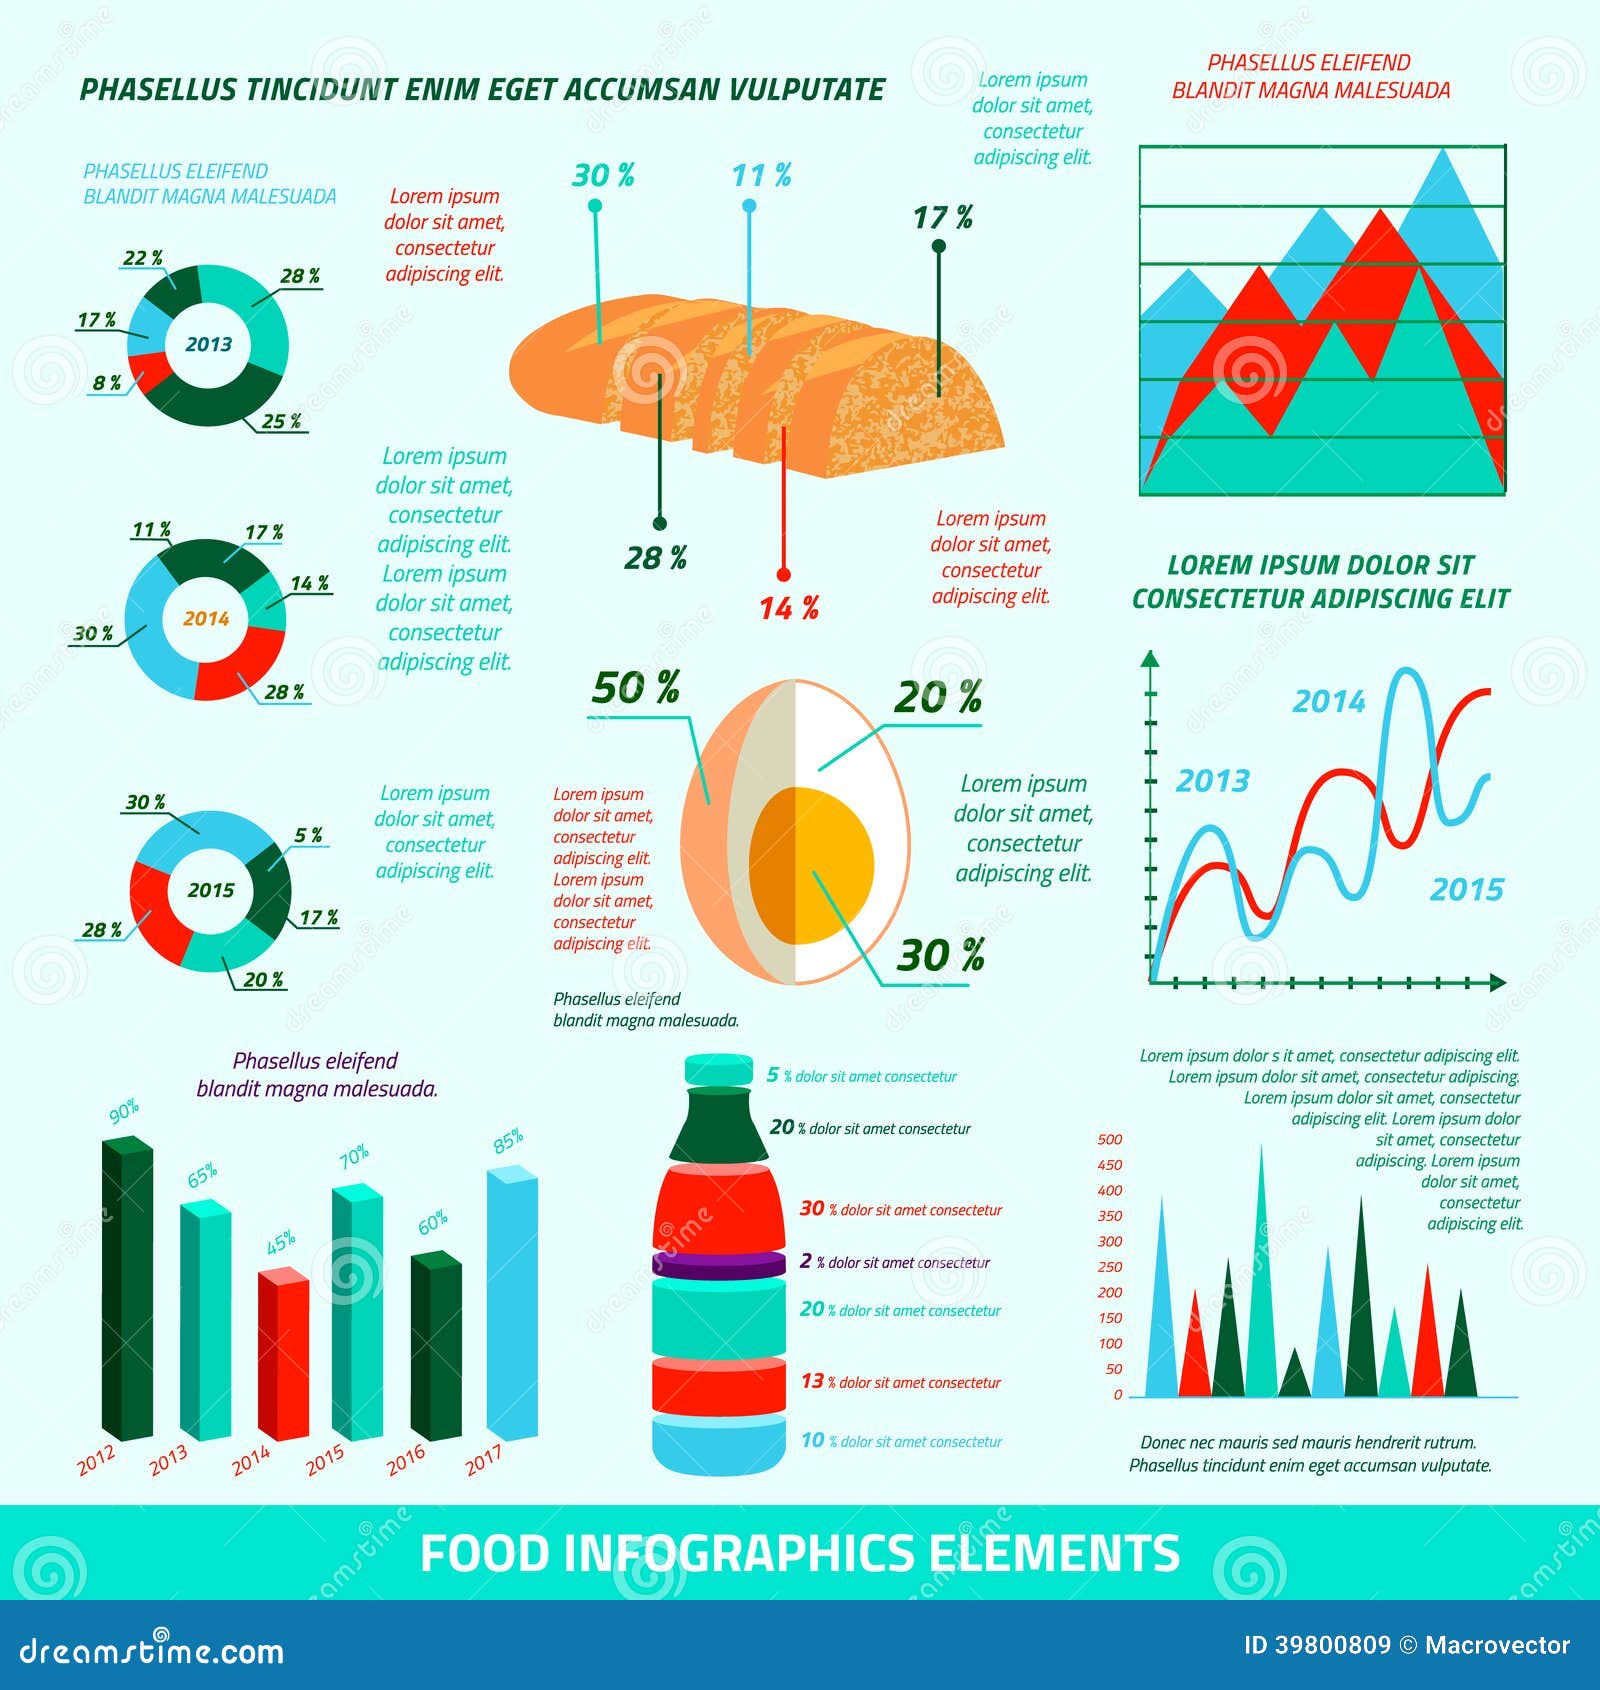 Food infographic elements stock vector. Illustration of elements - 39800809